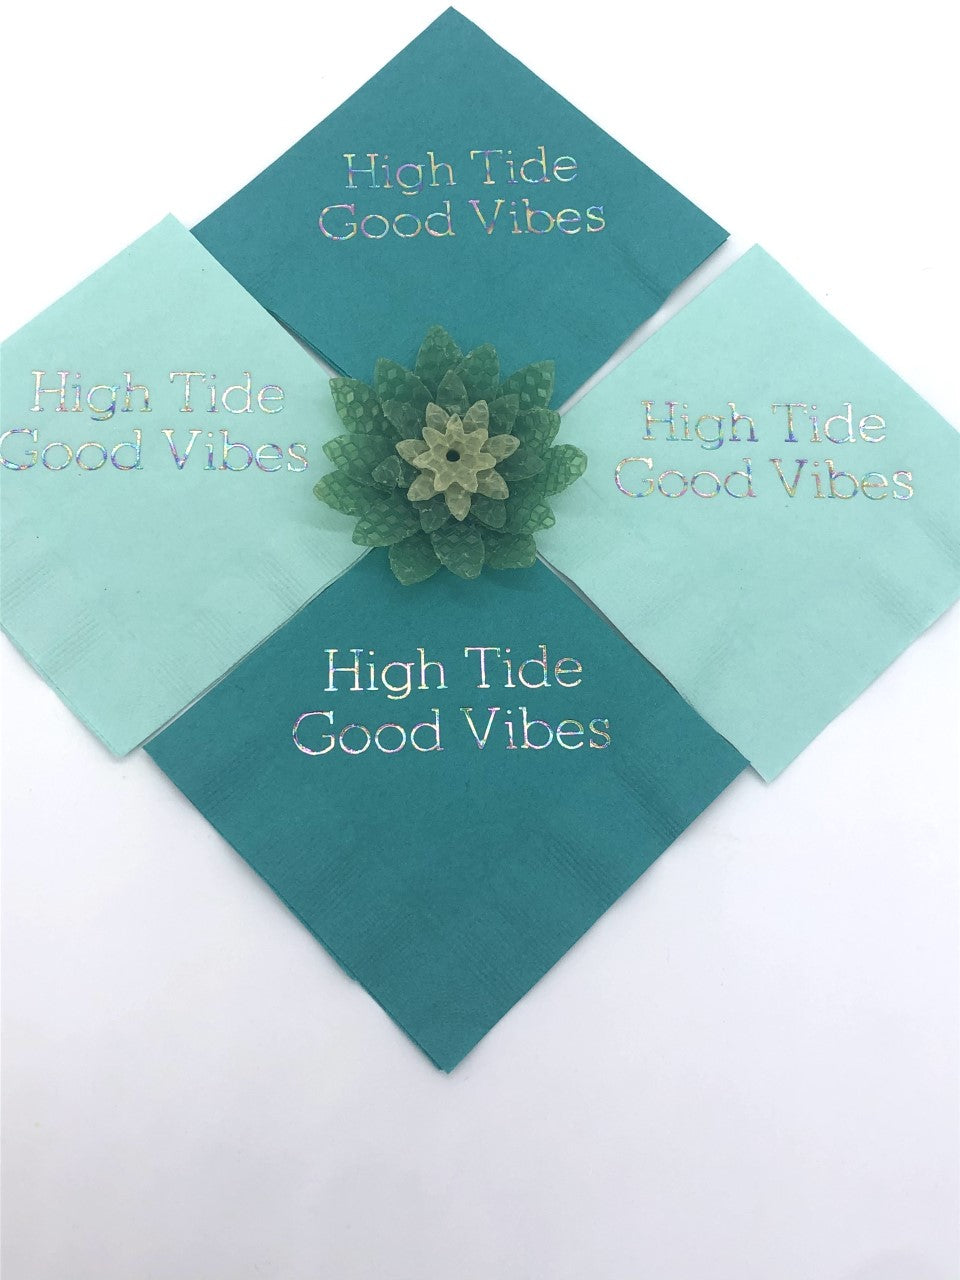 Teal and seafoam cocktail napkins with iridescent High Tide Good Vibes slogan